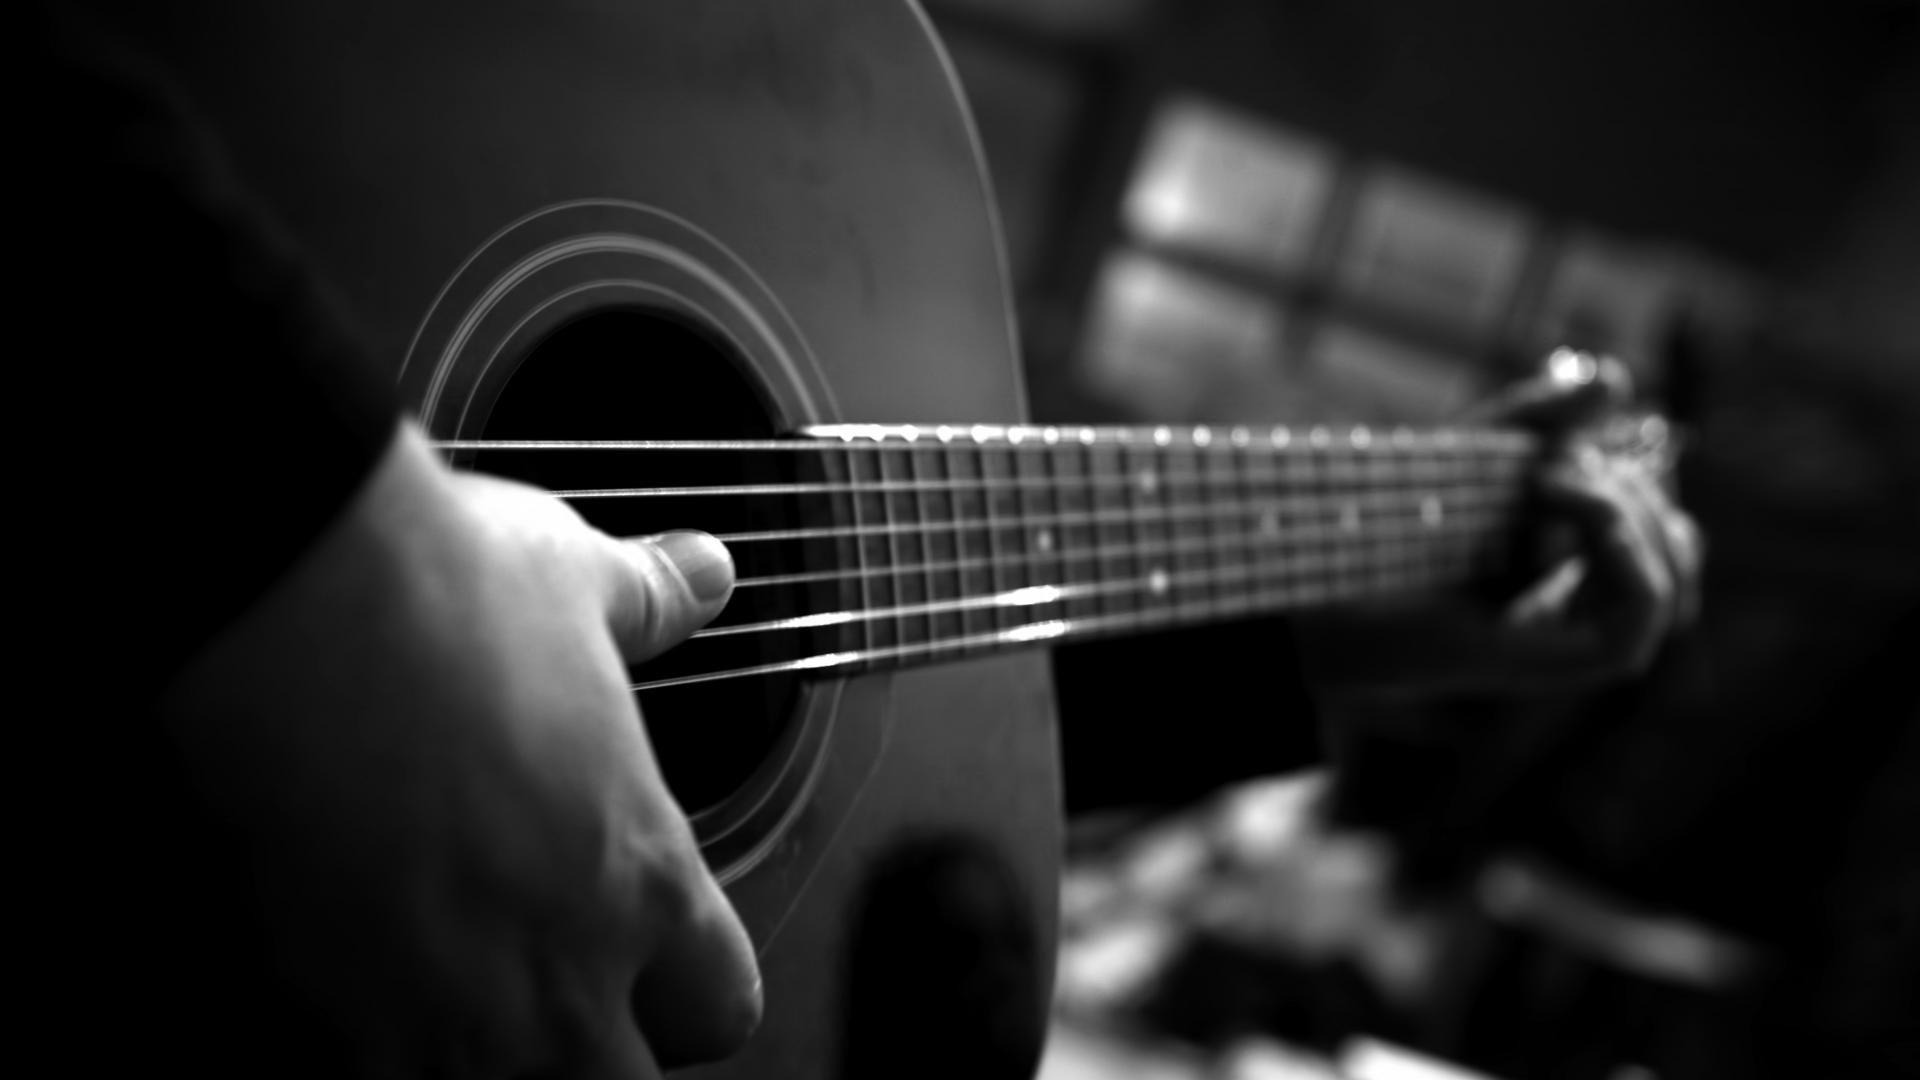 Black and white music acoustic guitars wallpaper